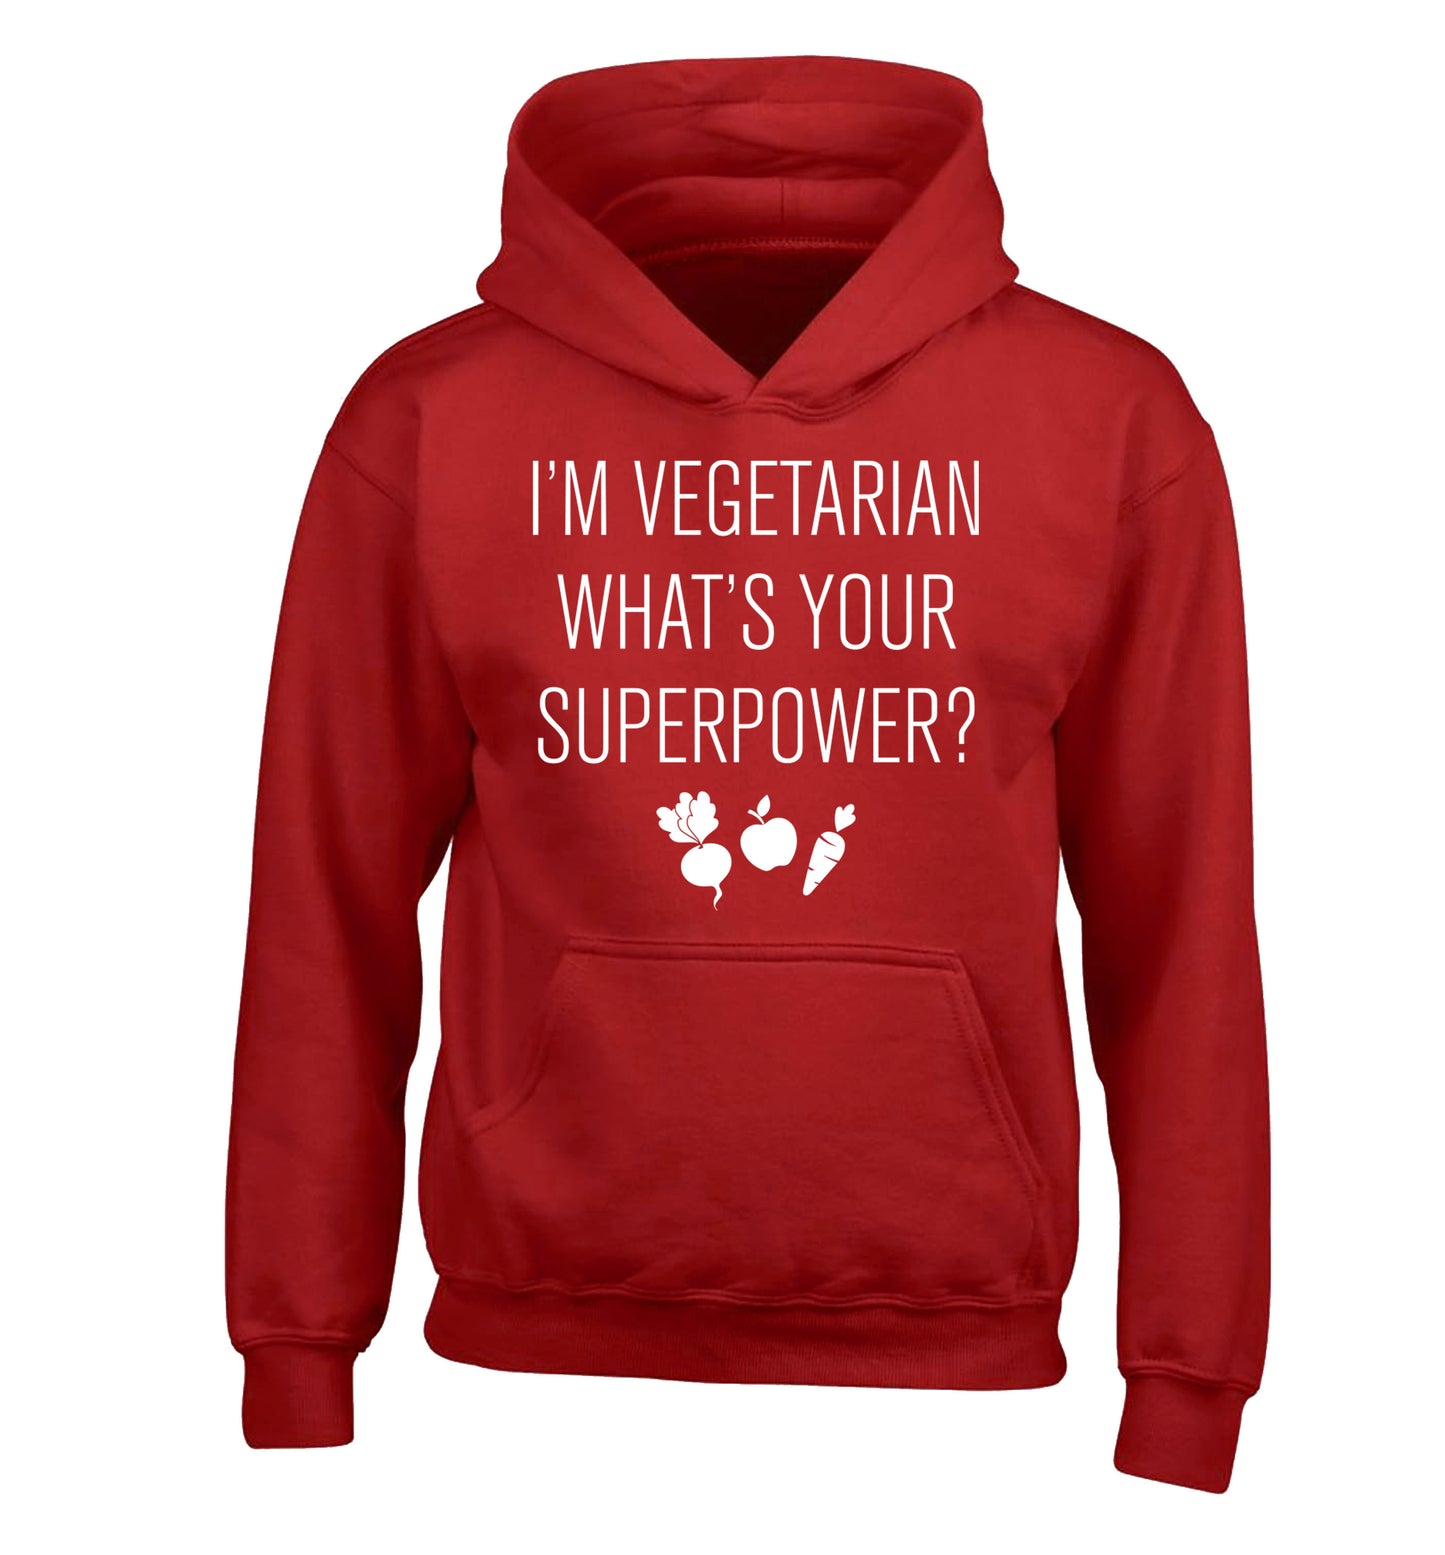 I'm vegetarian what's your superpower? children's red hoodie 12-13 Years